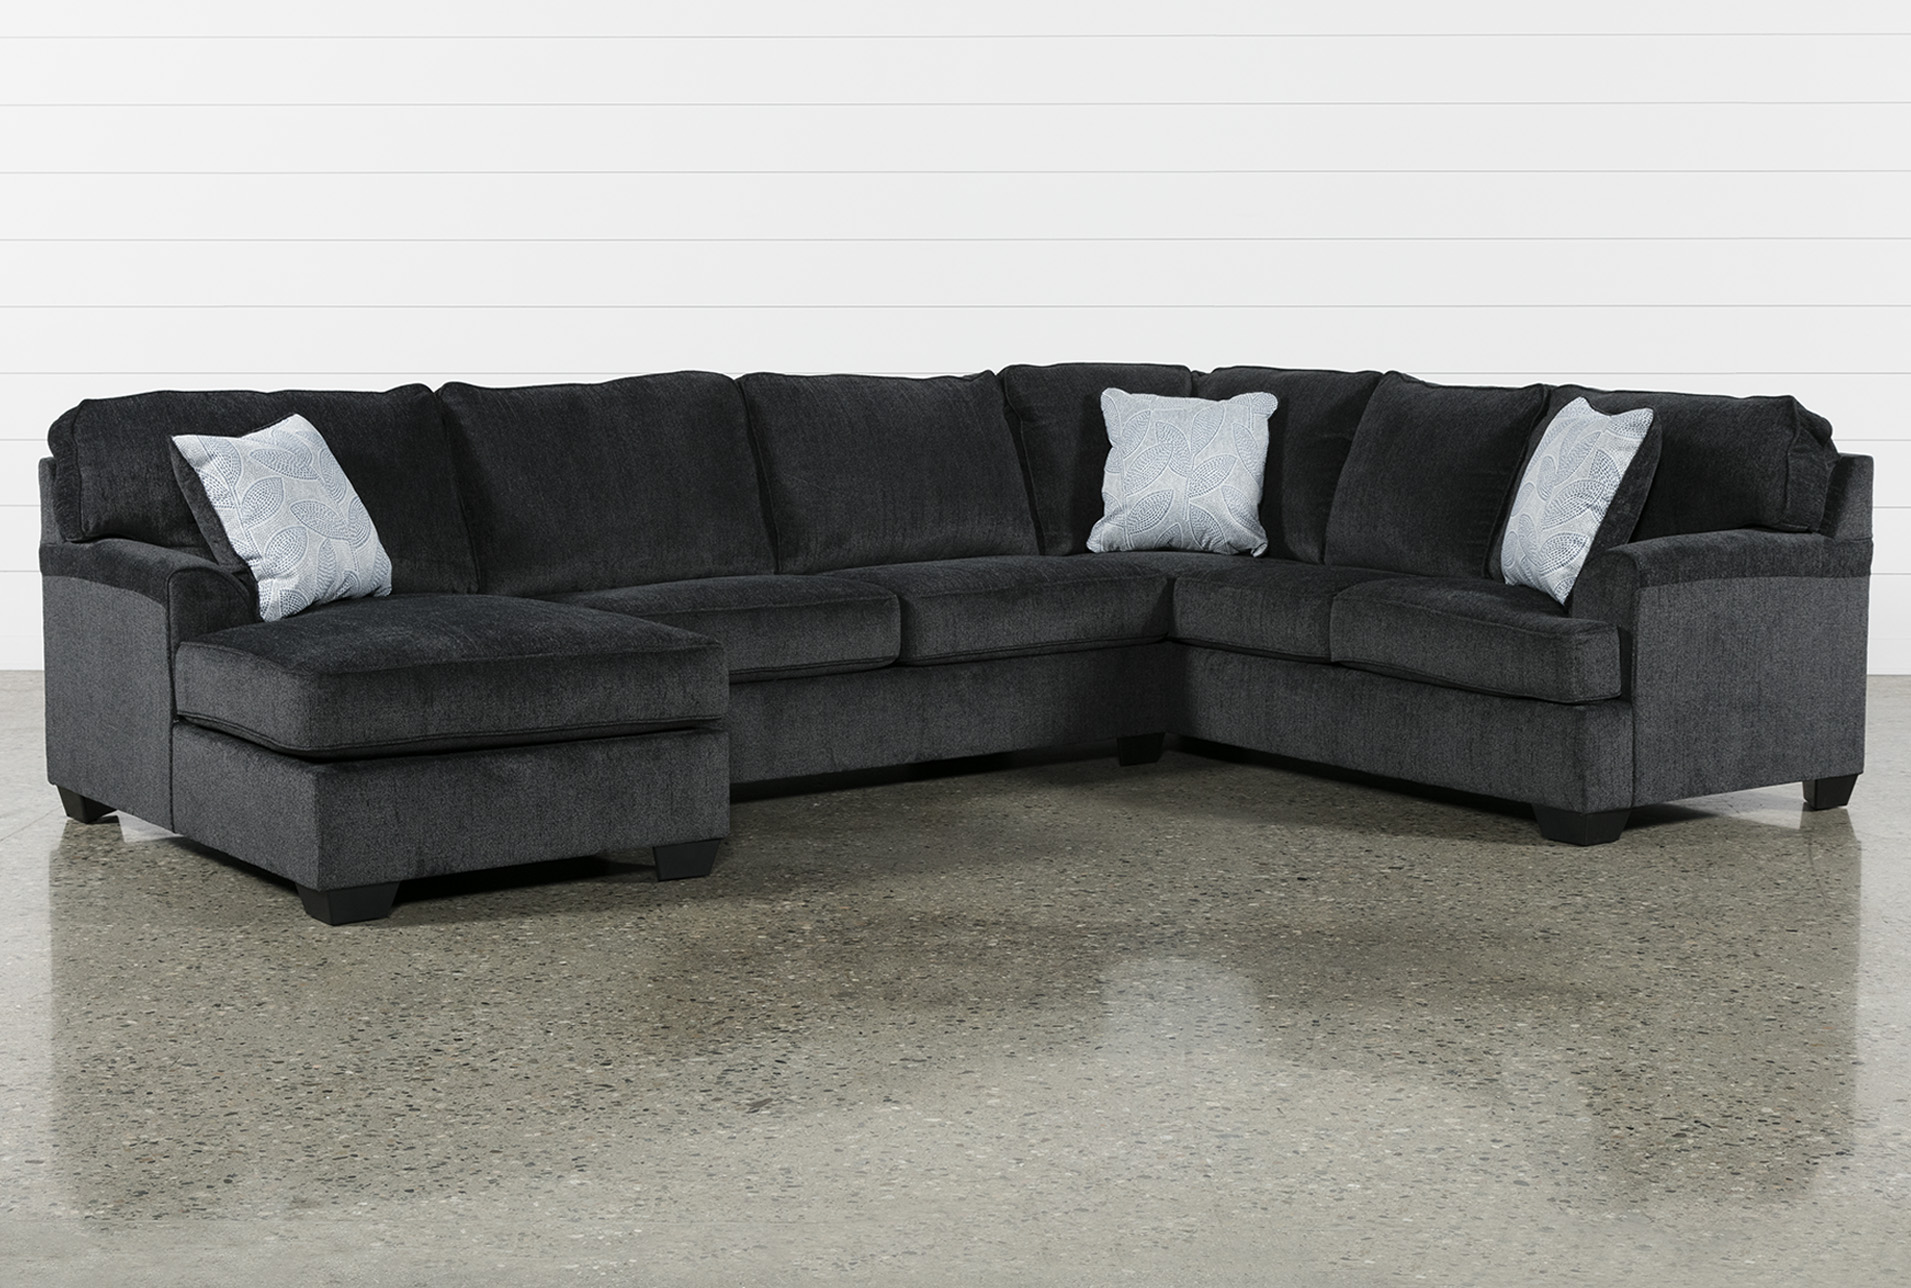 Calvin Slate 3 Piece Sectional With Laf Chaise